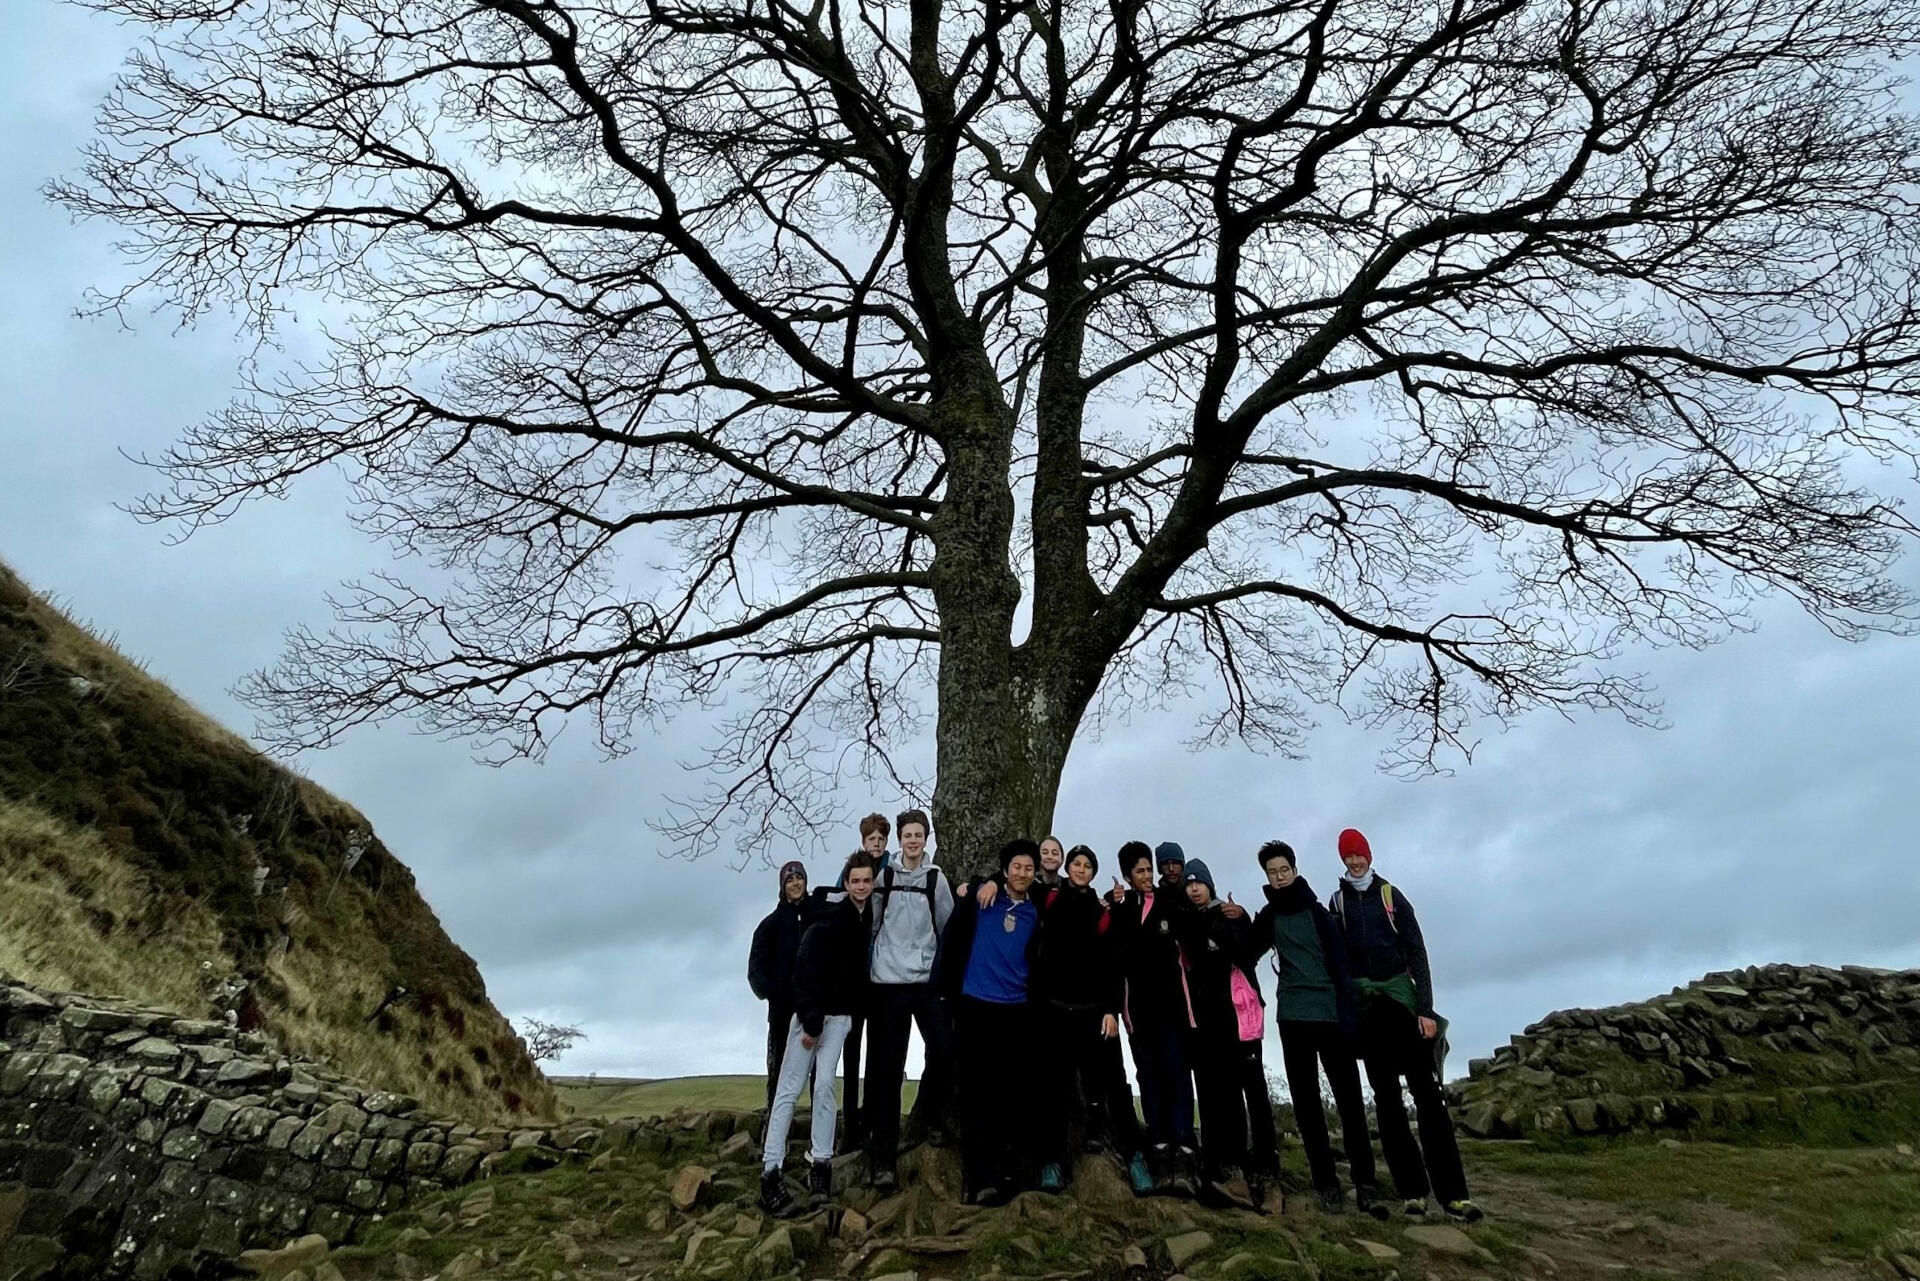 Hakluyt's Fifth Form experienced on their first trip to the School’s house